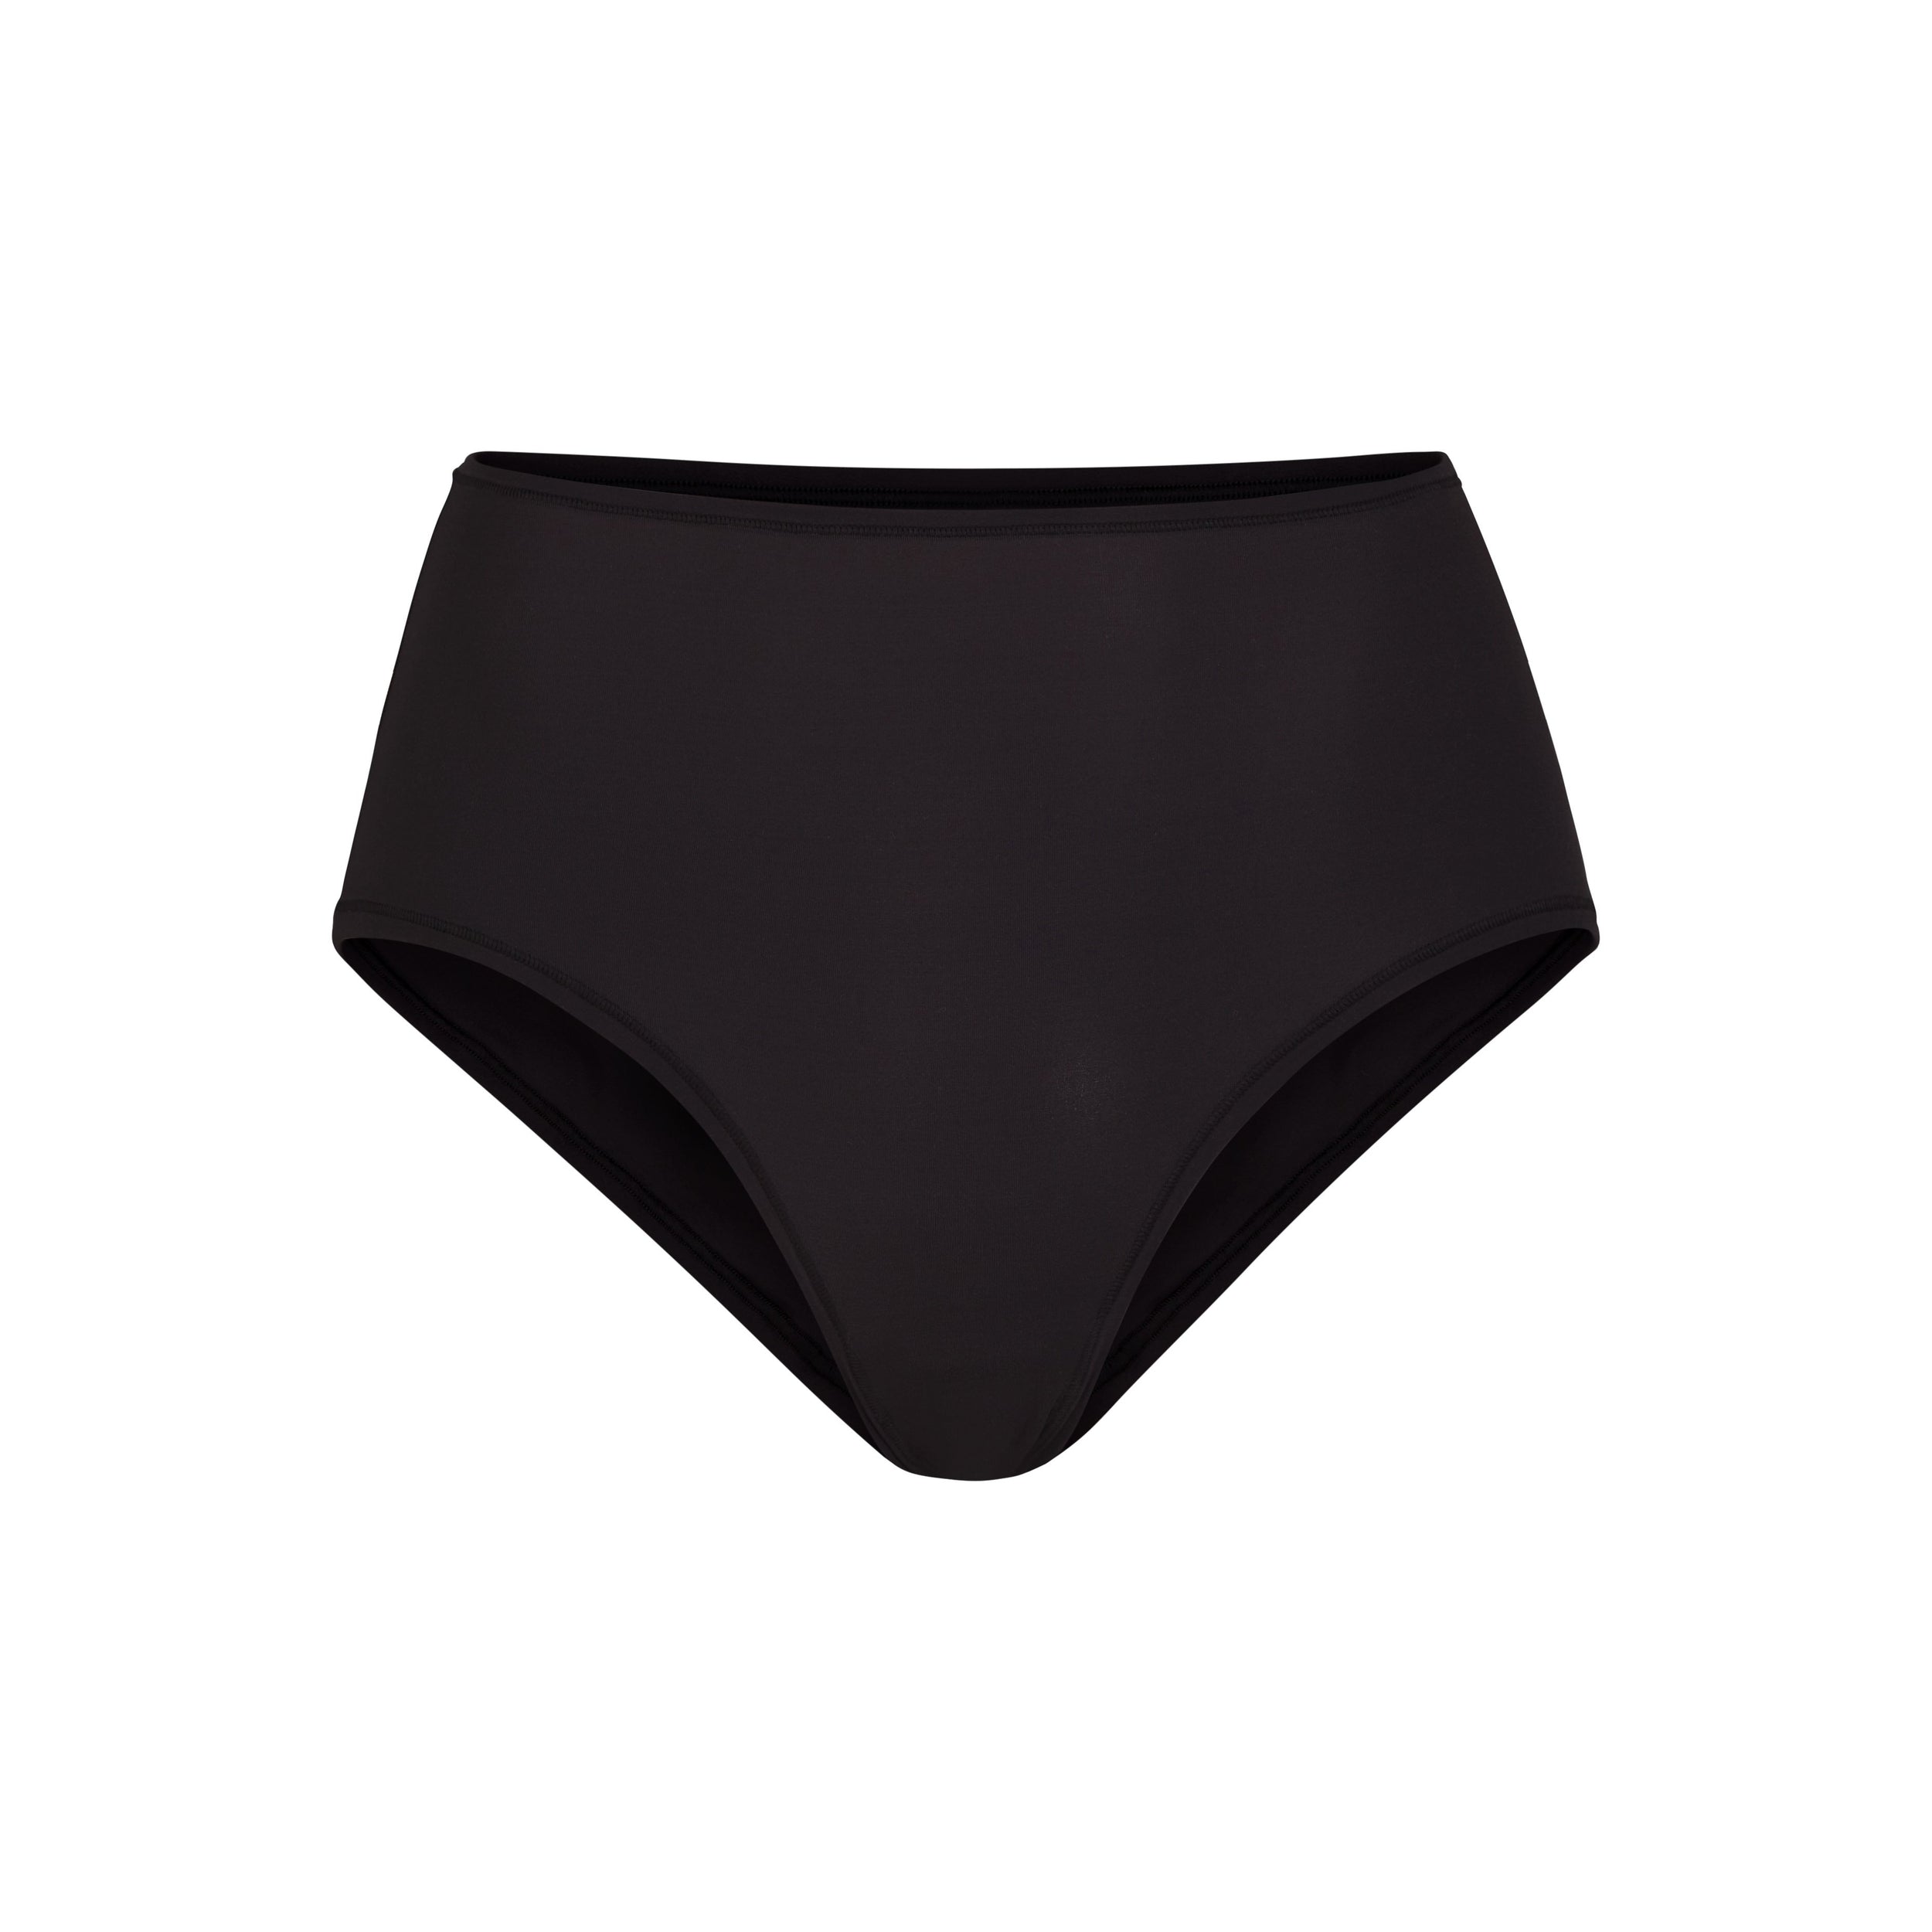 s No. 1 bestselling undies are on sale